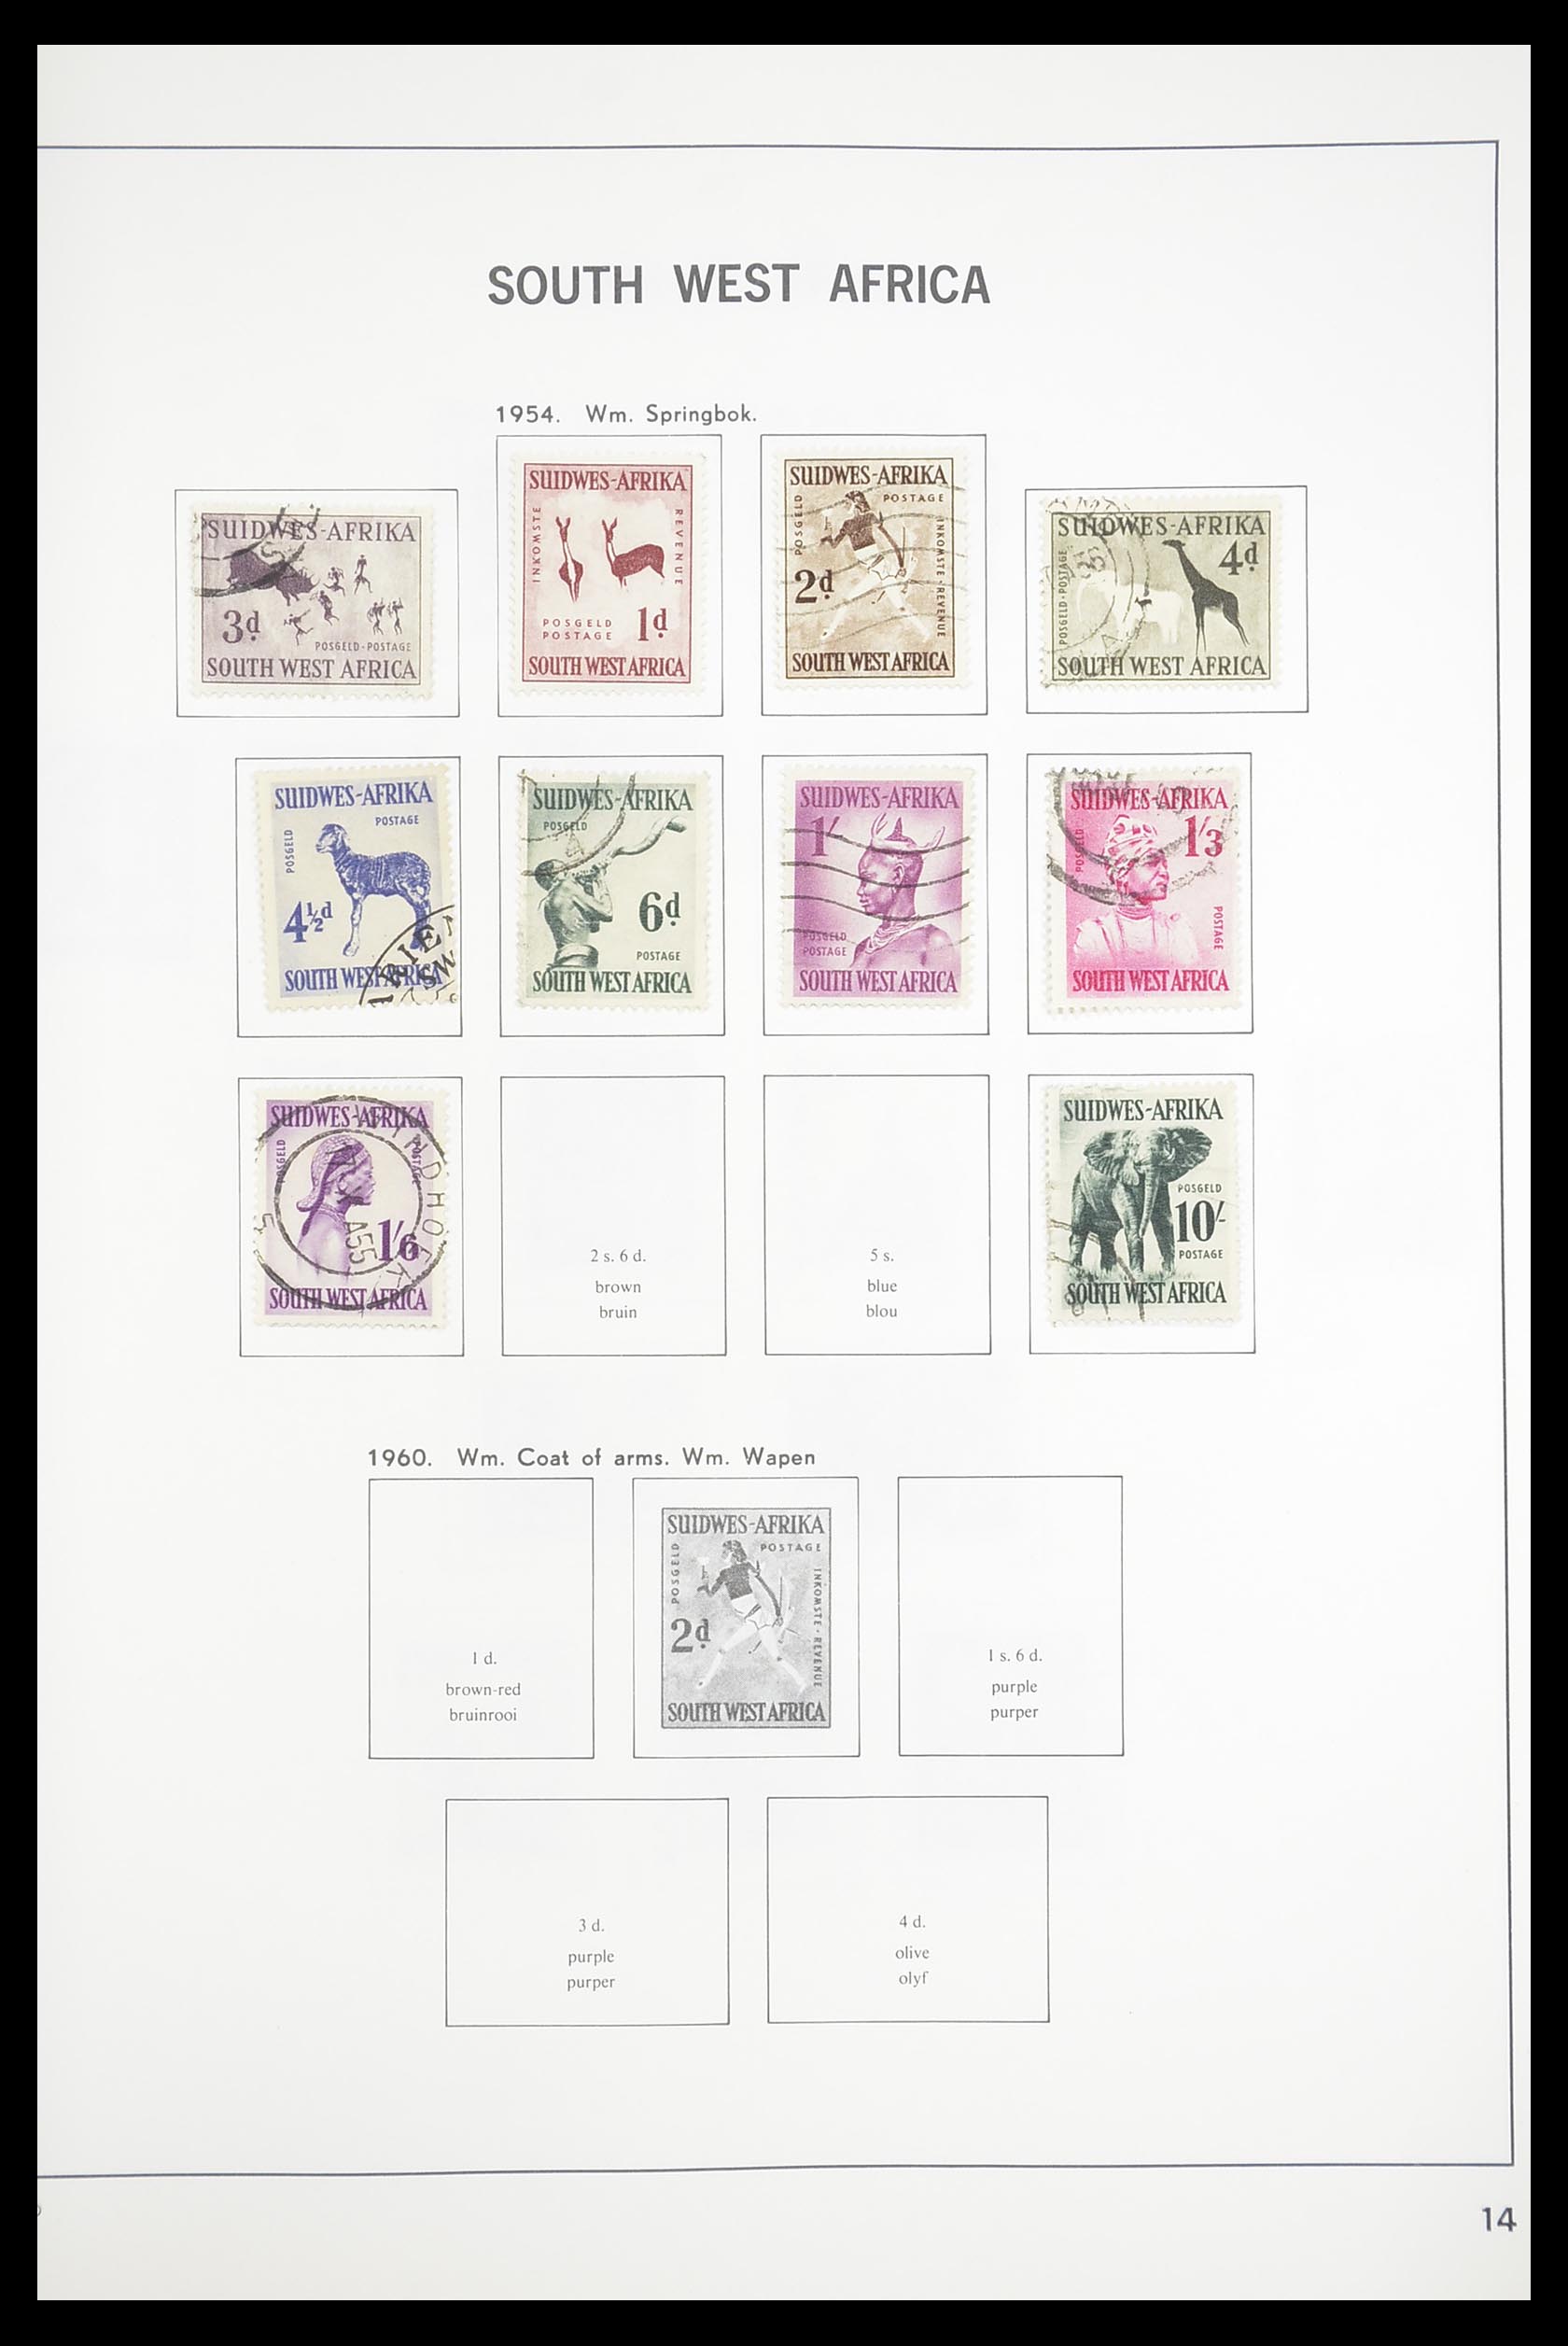 33393 098 - Stamp collection 33393 South Africa and territories 1910-1998.